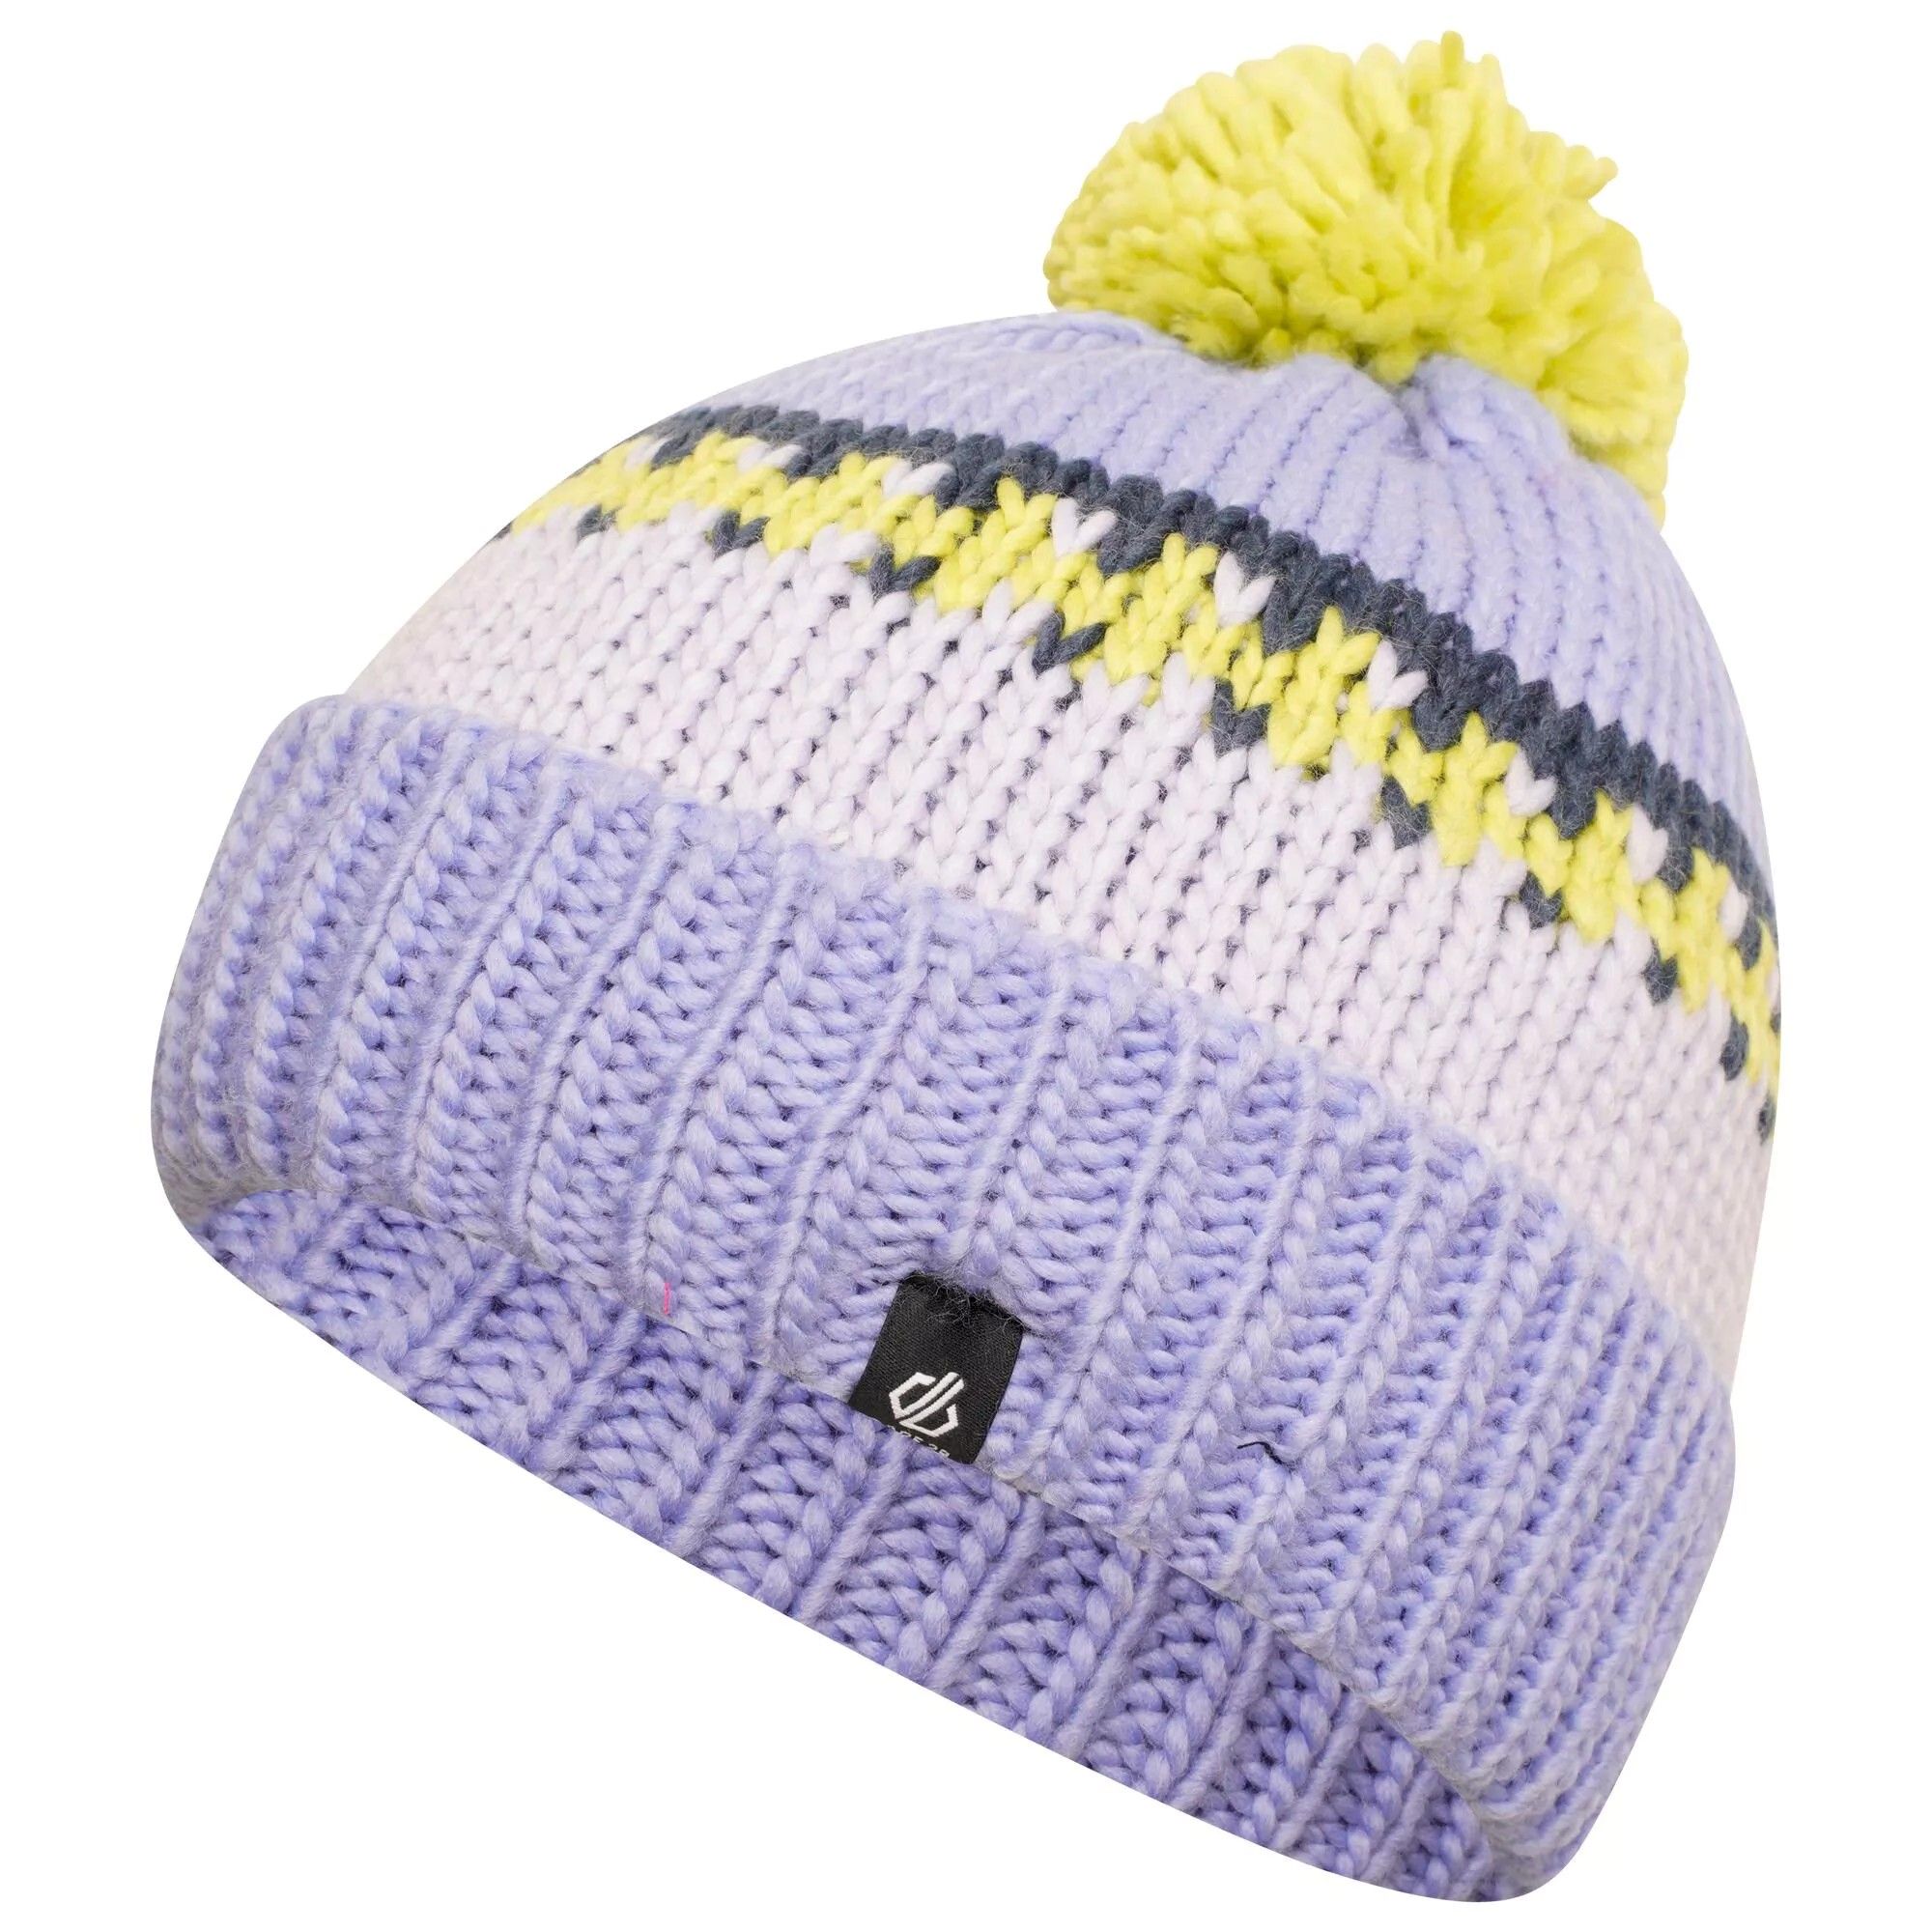 Material: Acrylic. Lining: Fleece. Fabric: Knitted, Soft Touch. Design: Contrast Striped, Logo. Bobble, Ribbed Cuff. Sustainability: Made from Recycled Materials.